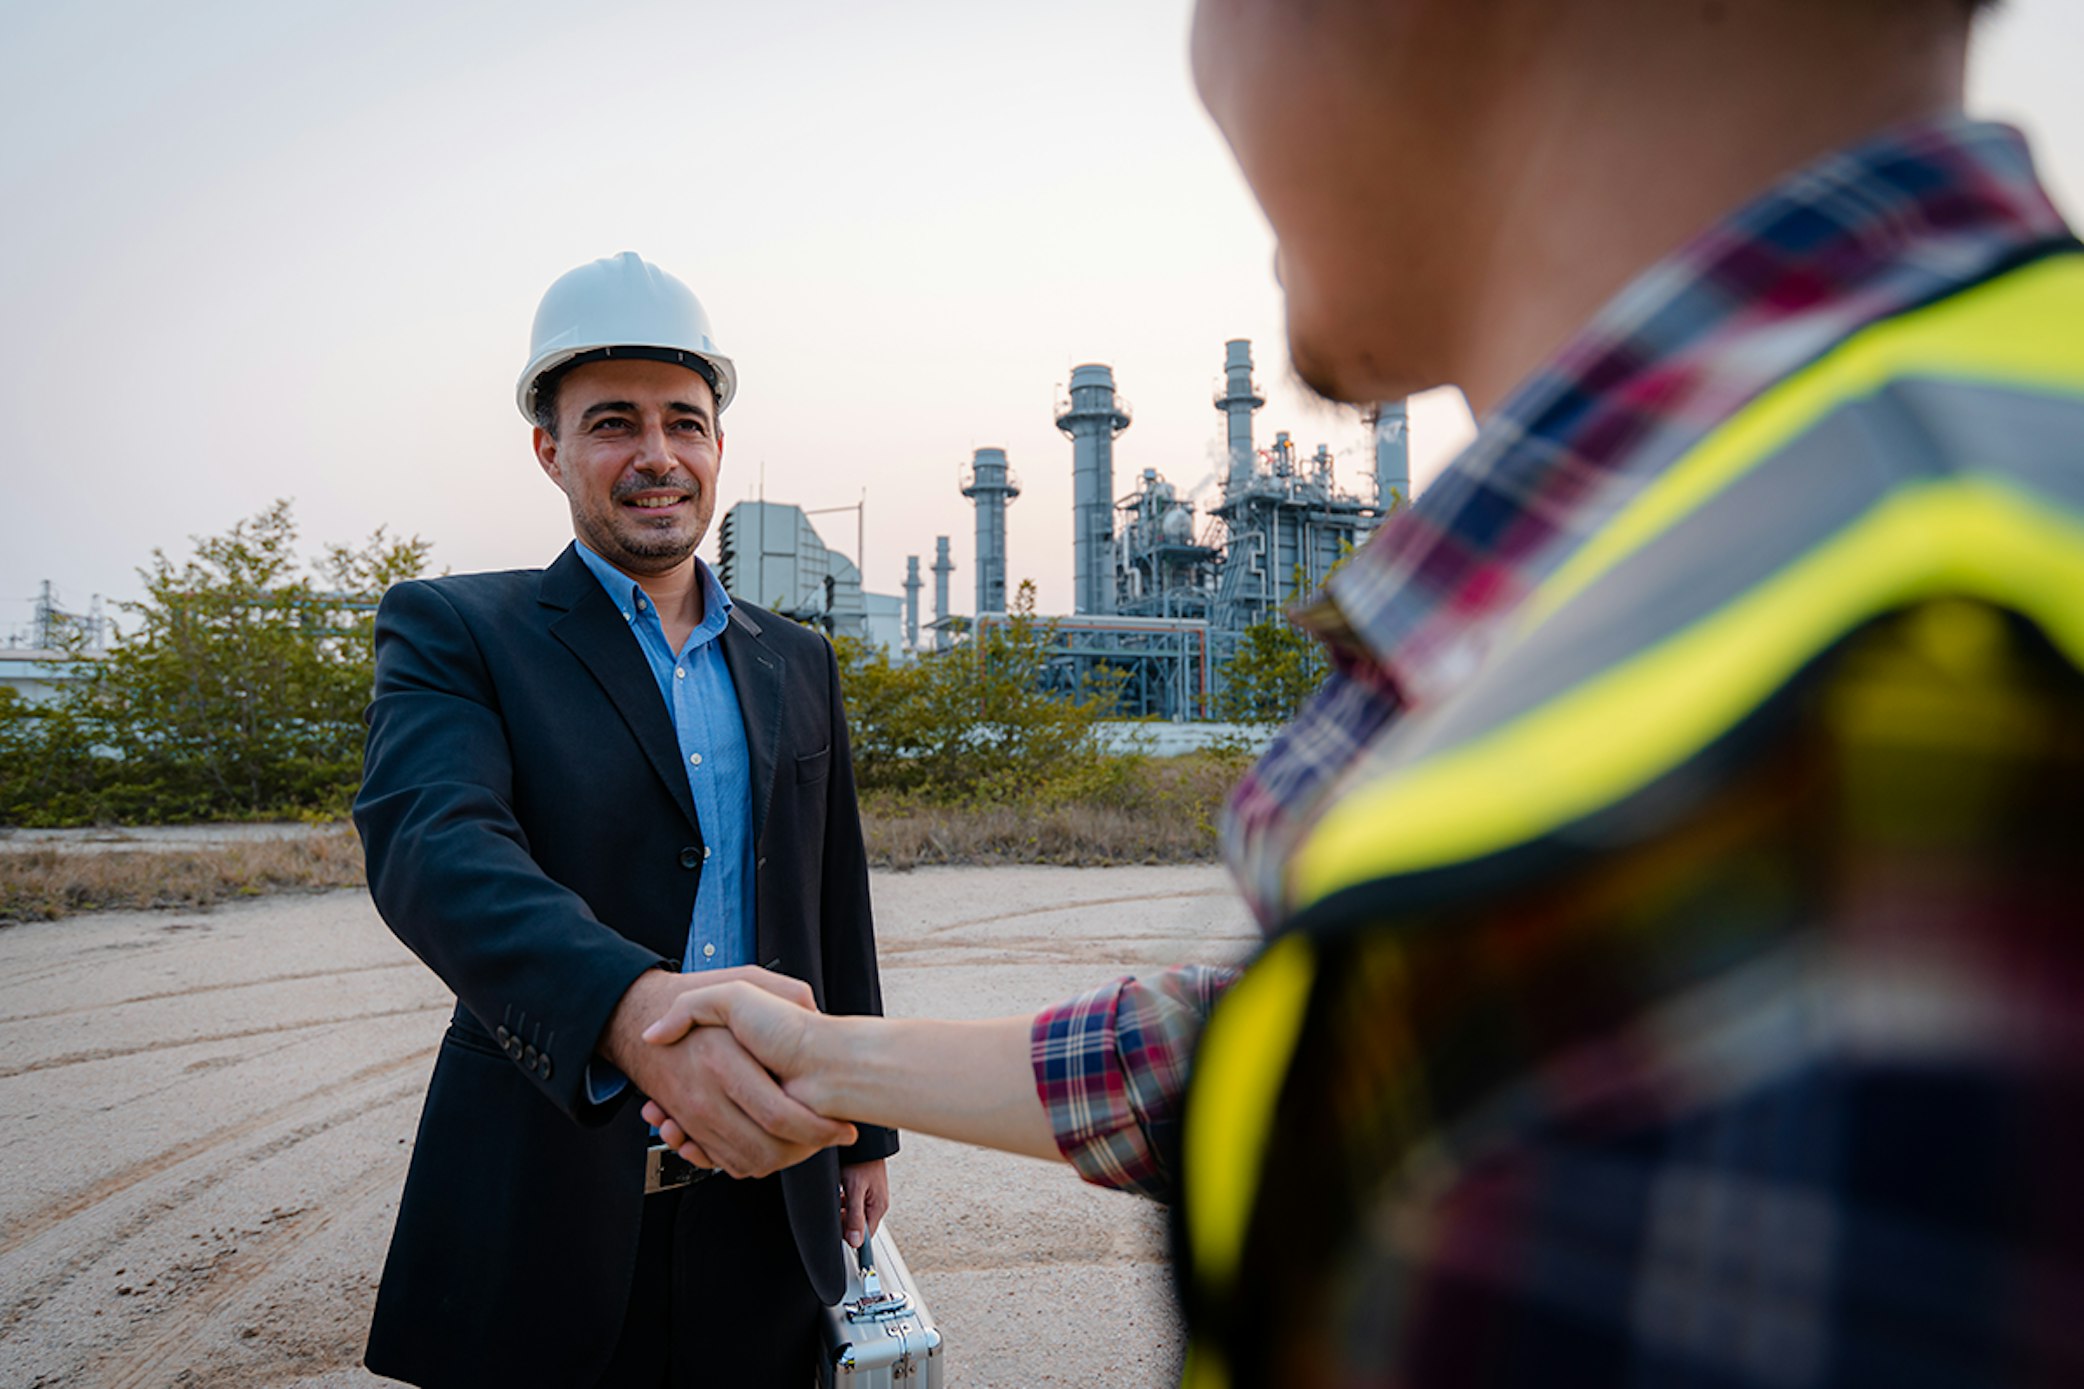 Man in suit shaking hands with worker